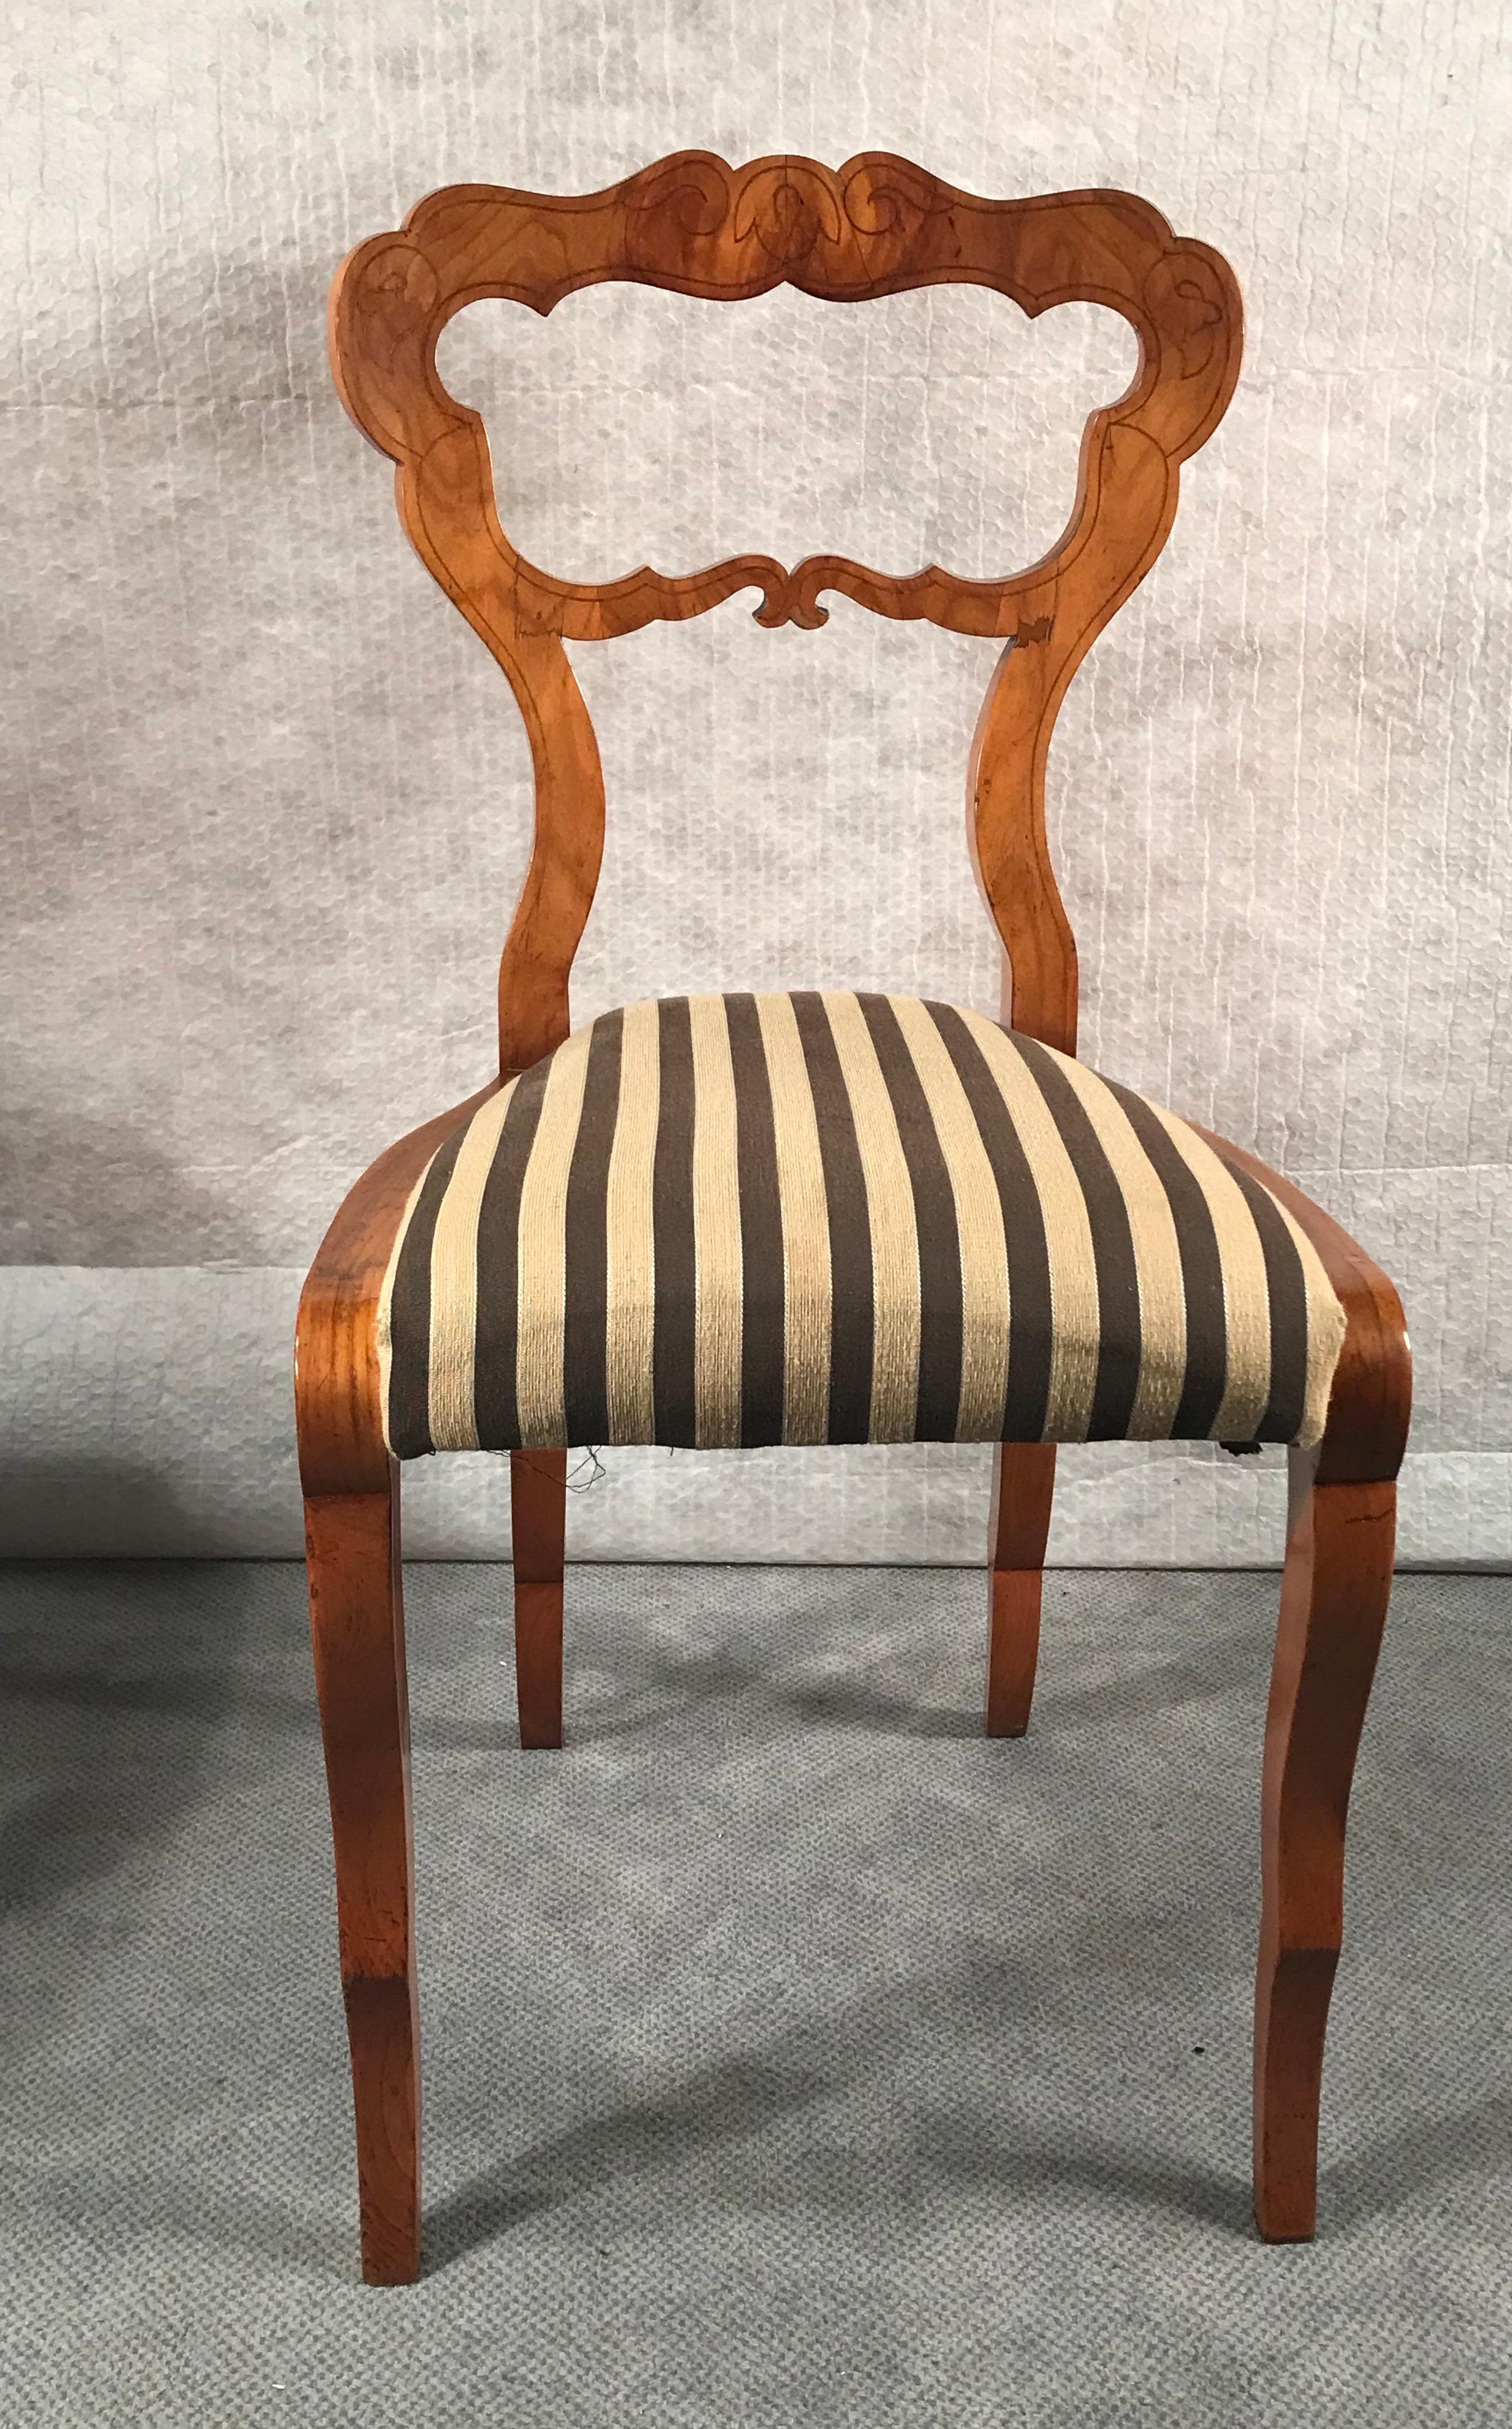 Pair of Biedermeier Chairs, 1820, Danhauser Style In Good Condition For Sale In Belmont, MA